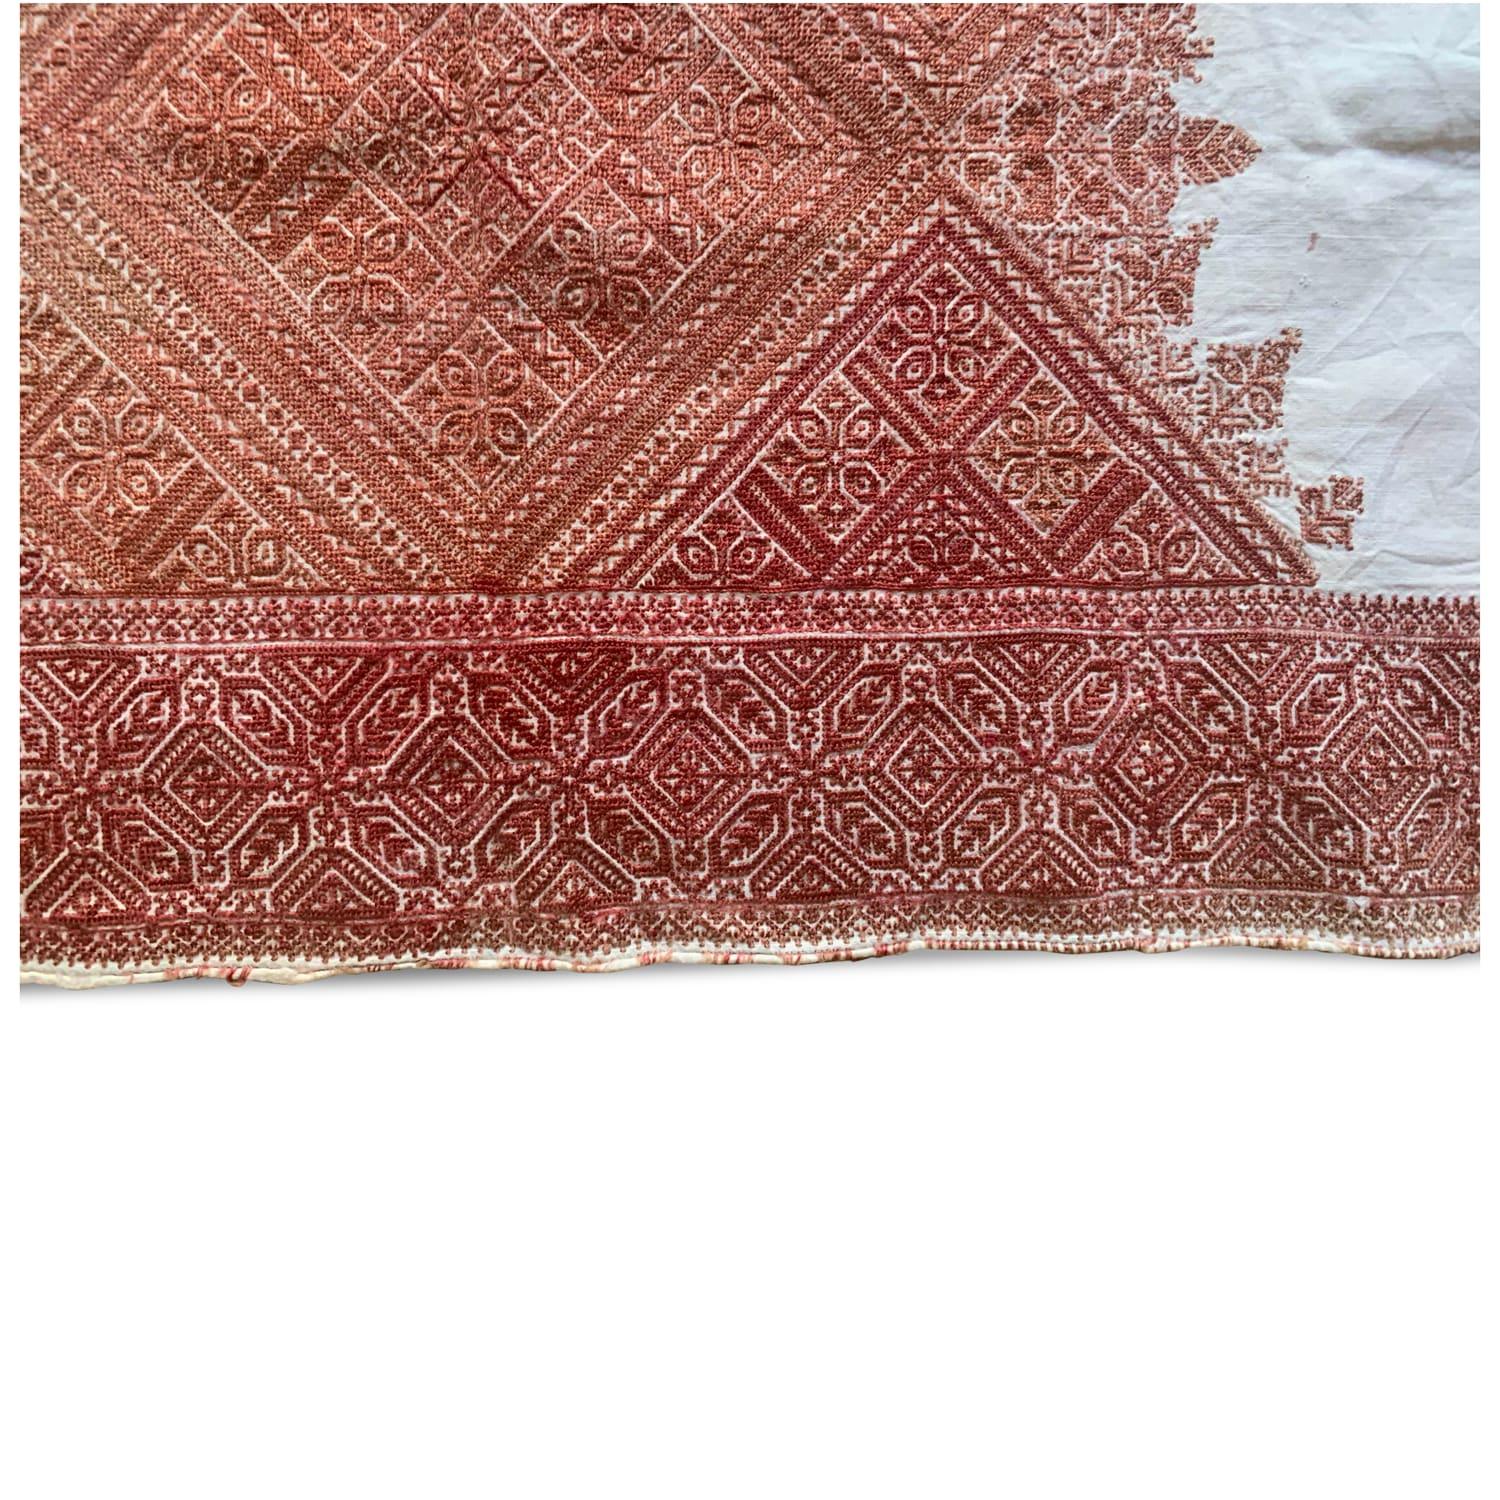 Embroidered 19th Century Fez Embroidery For Sale